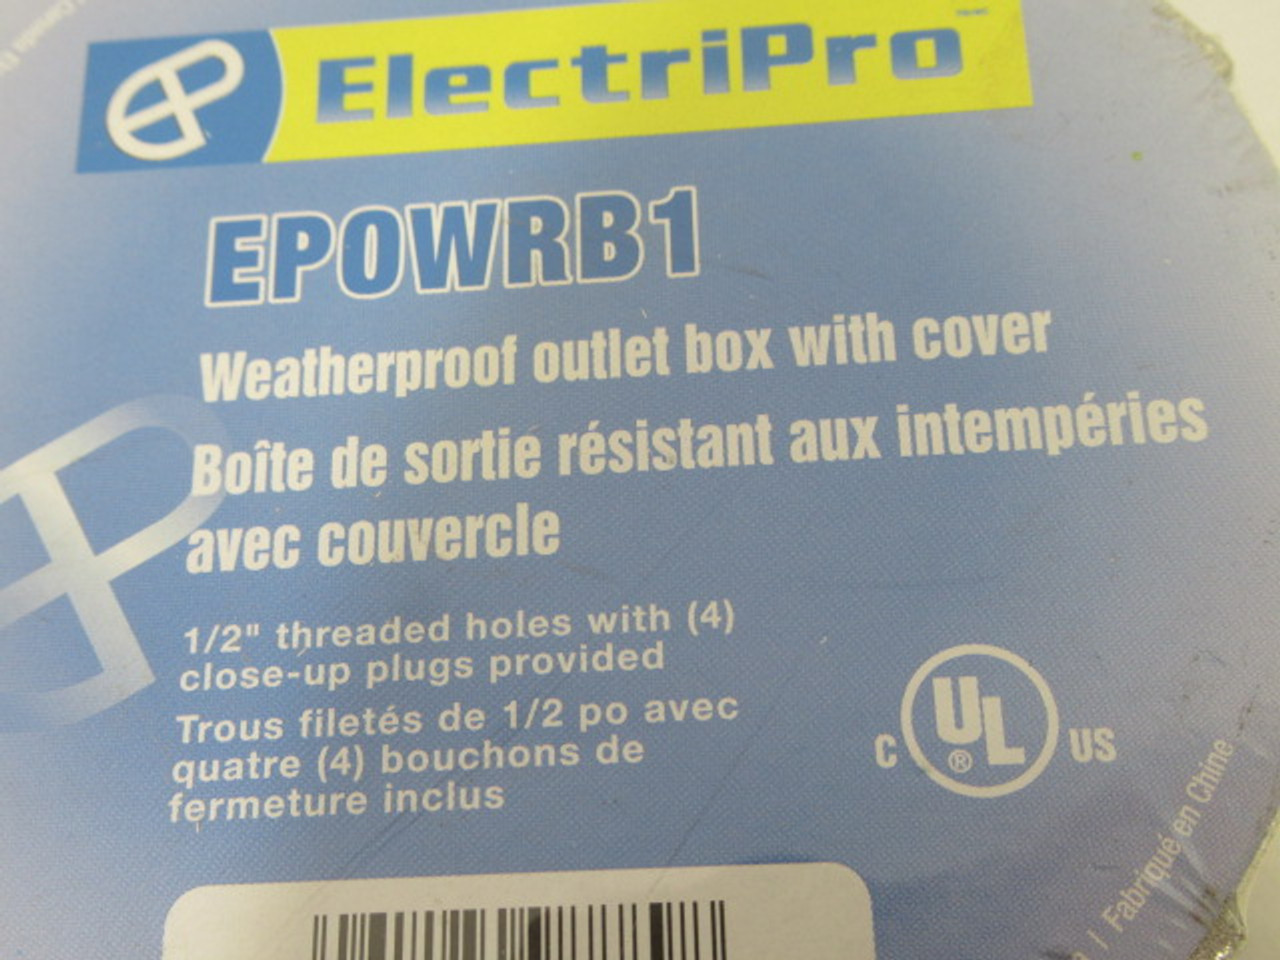 ElectriPro EPOWRB1 Weatherproof Outlet Box w/Cover 4x1/2" ! NWB !